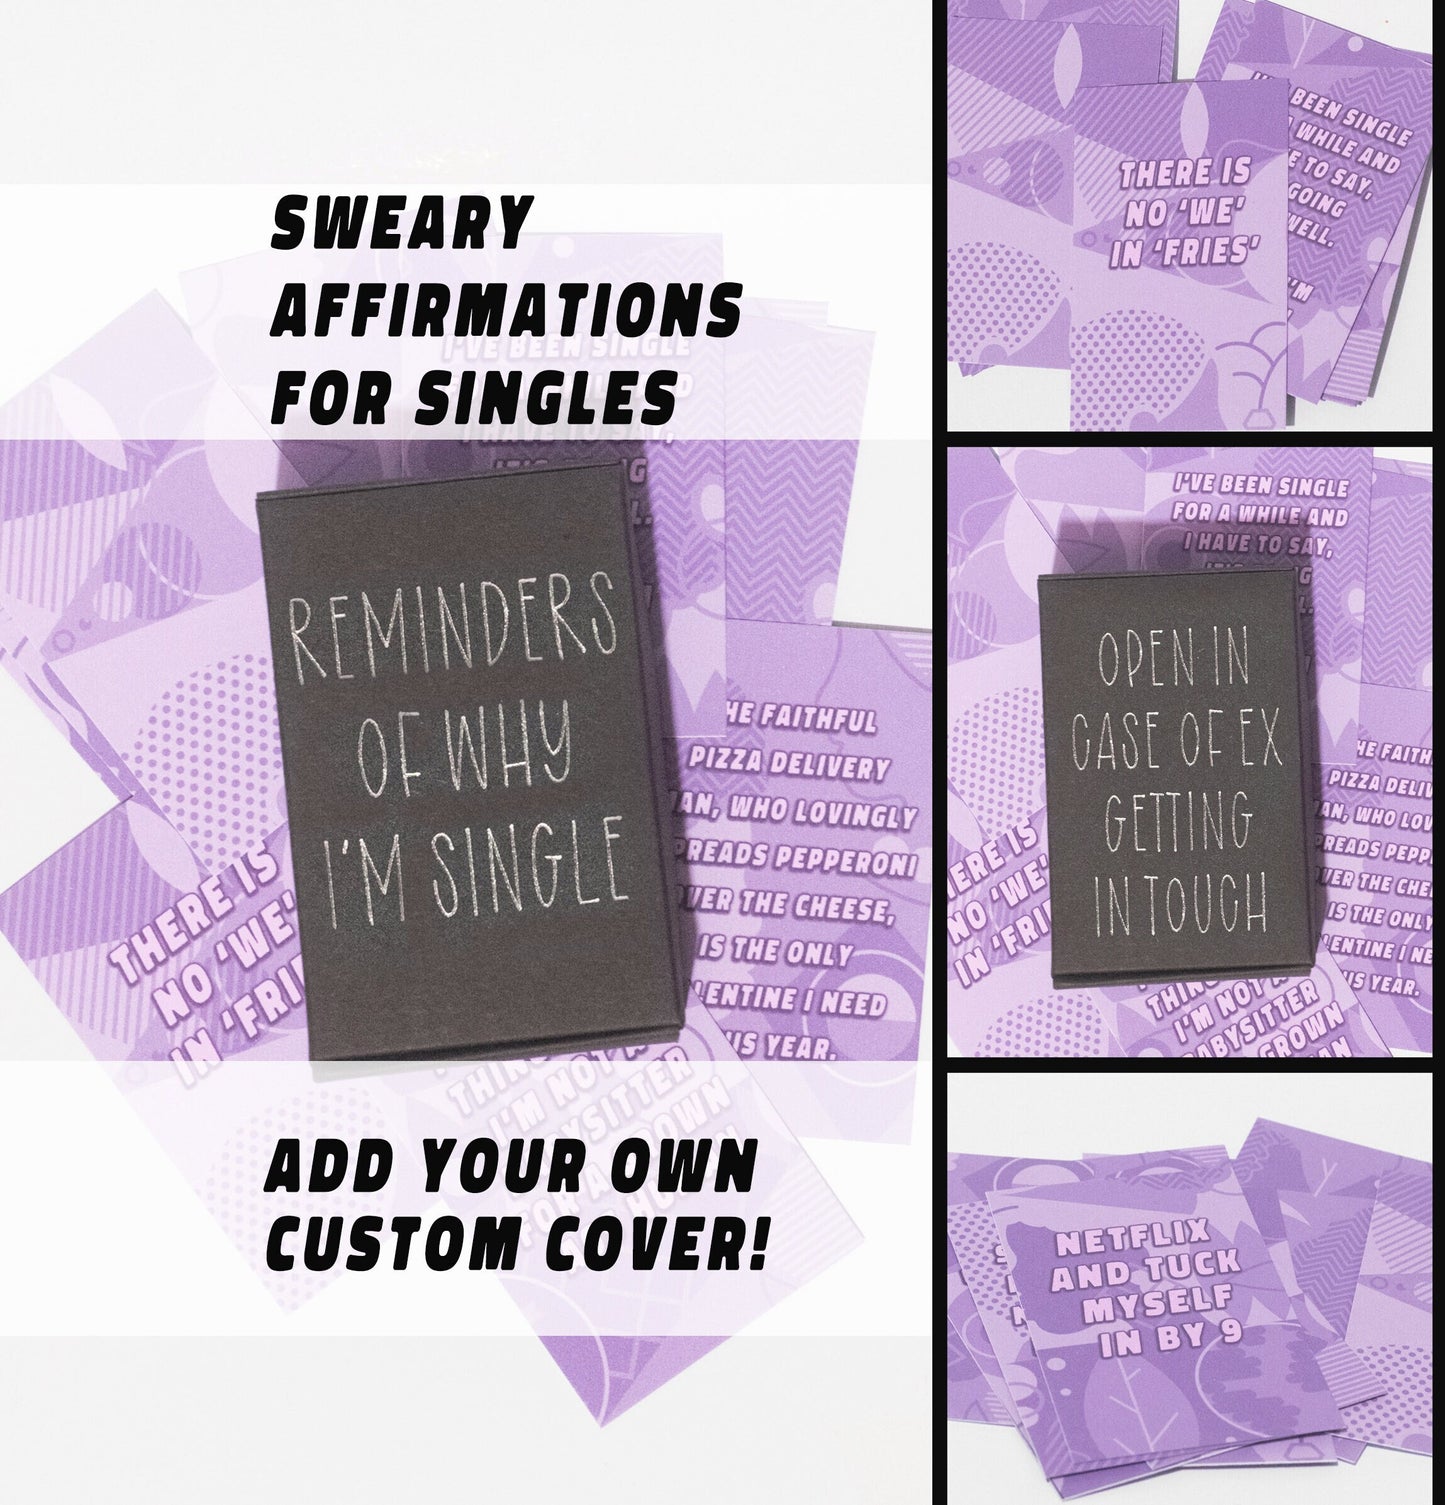 The Sweary Affirmation Shop - Empowering Affirmation Deck for Singles